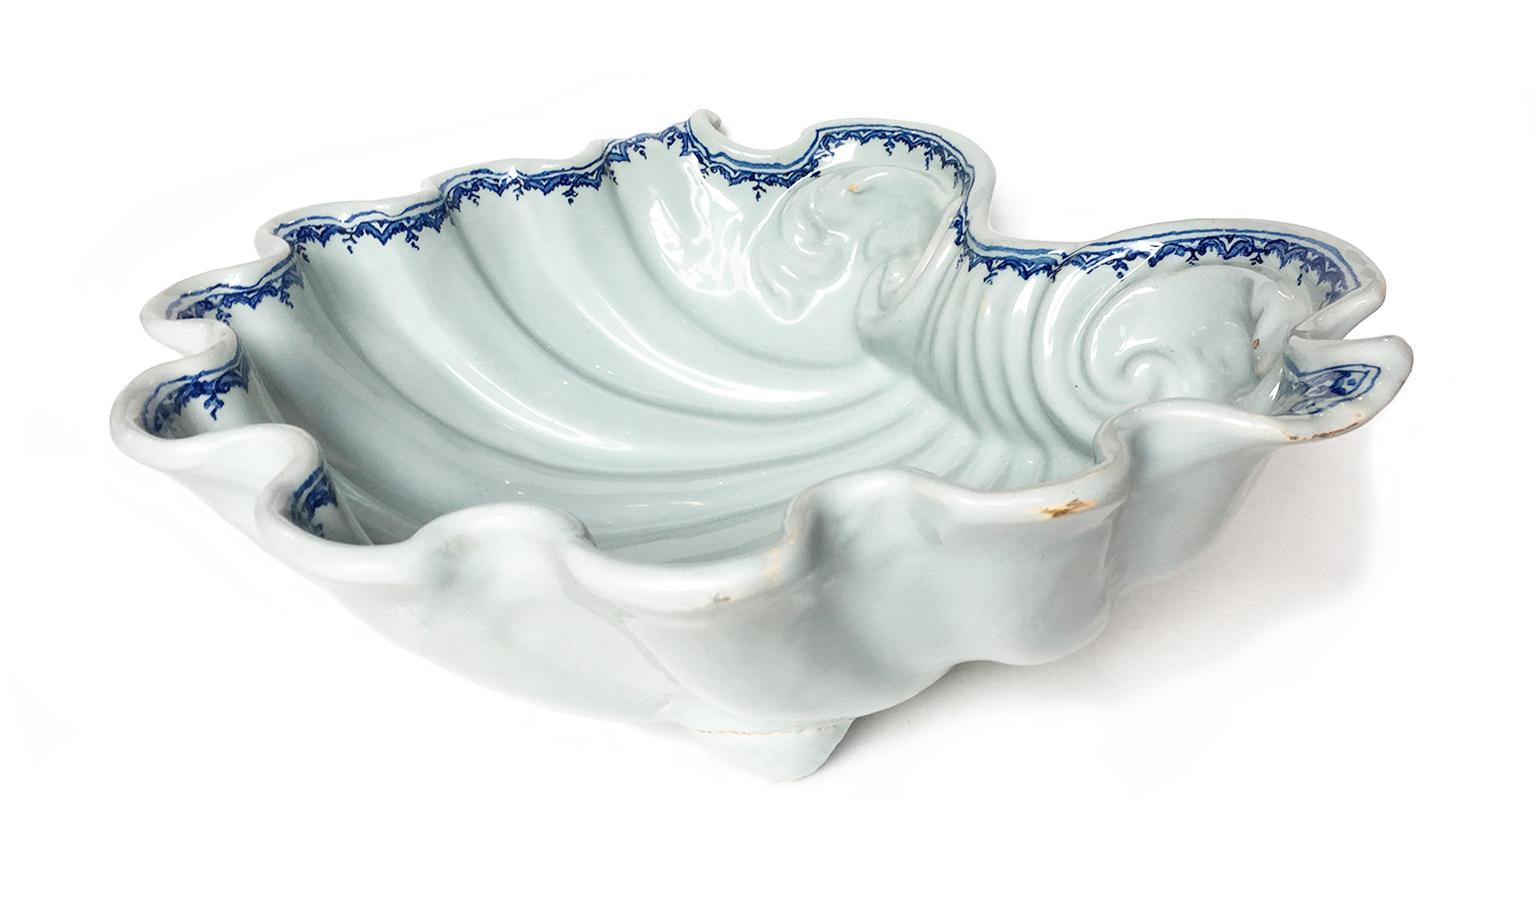 Centerpiece light blue maiolica shell
Ferniani factory, early period: 1693-1776
Faenza, 1700 circa
5.5 in x 14.72 in x 13.77 in (14 cm x 37.4 cm X cm 35)
lb 4.40 (kg 2)

State of conservation: mimetic restoration on the front and conservative